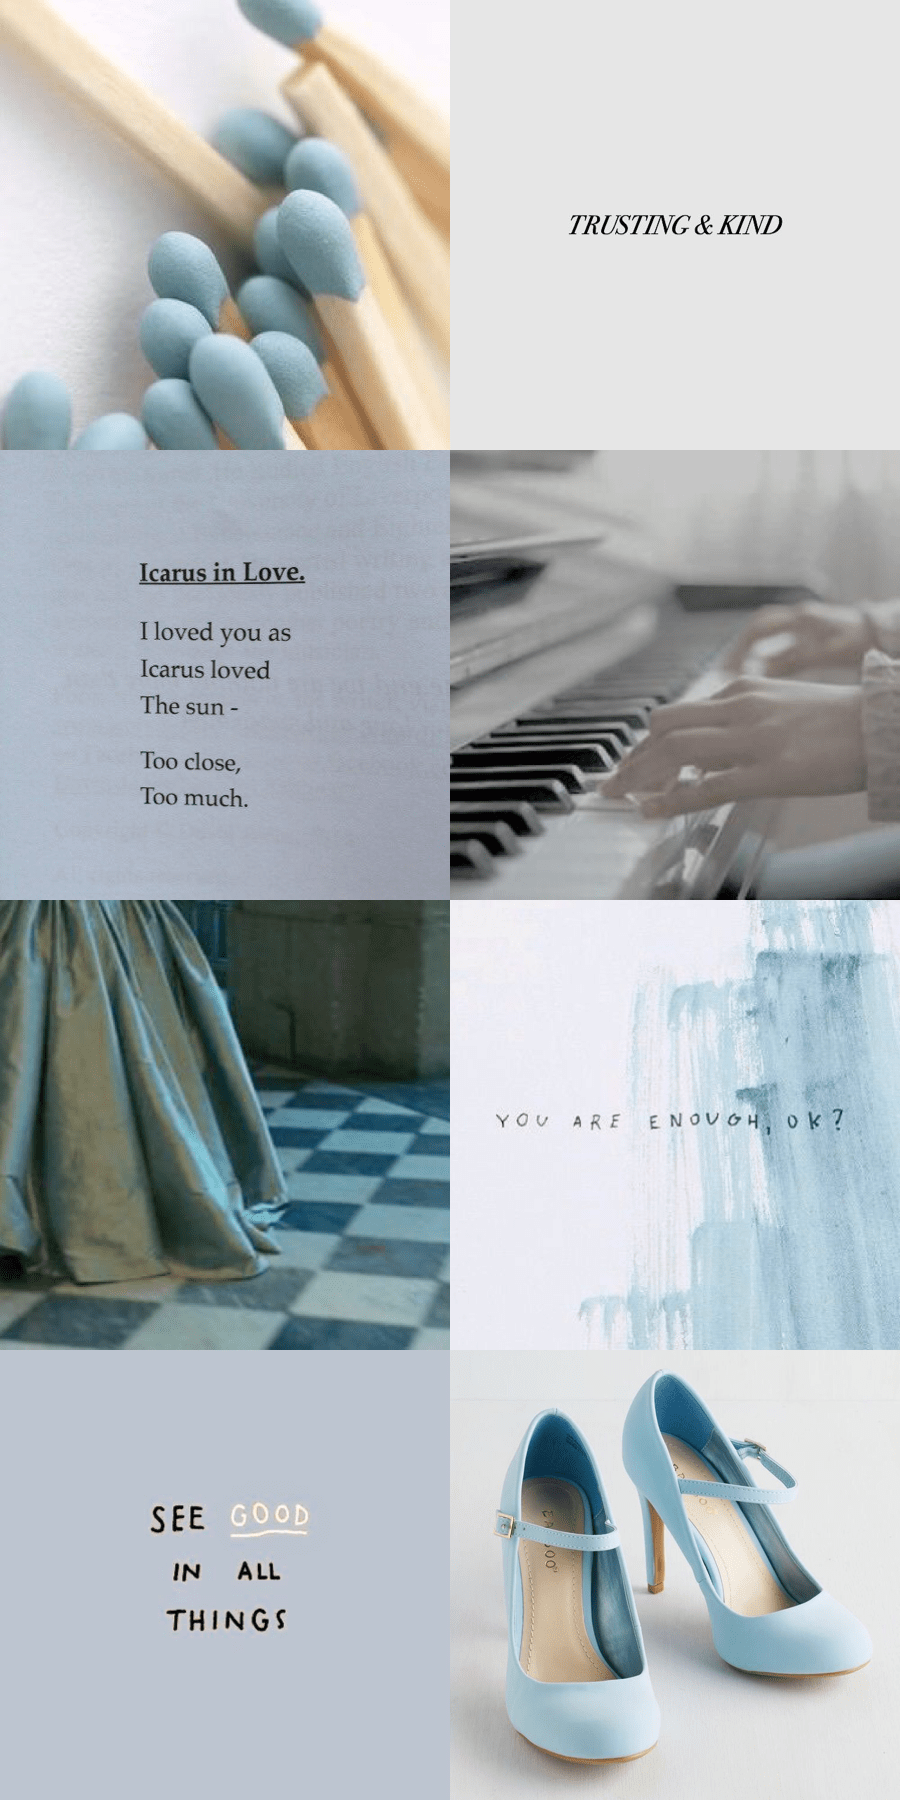 A mood board featuring blue and grey tones, a piano, and a Bible verse from 1 Corinthians. - Hamilton